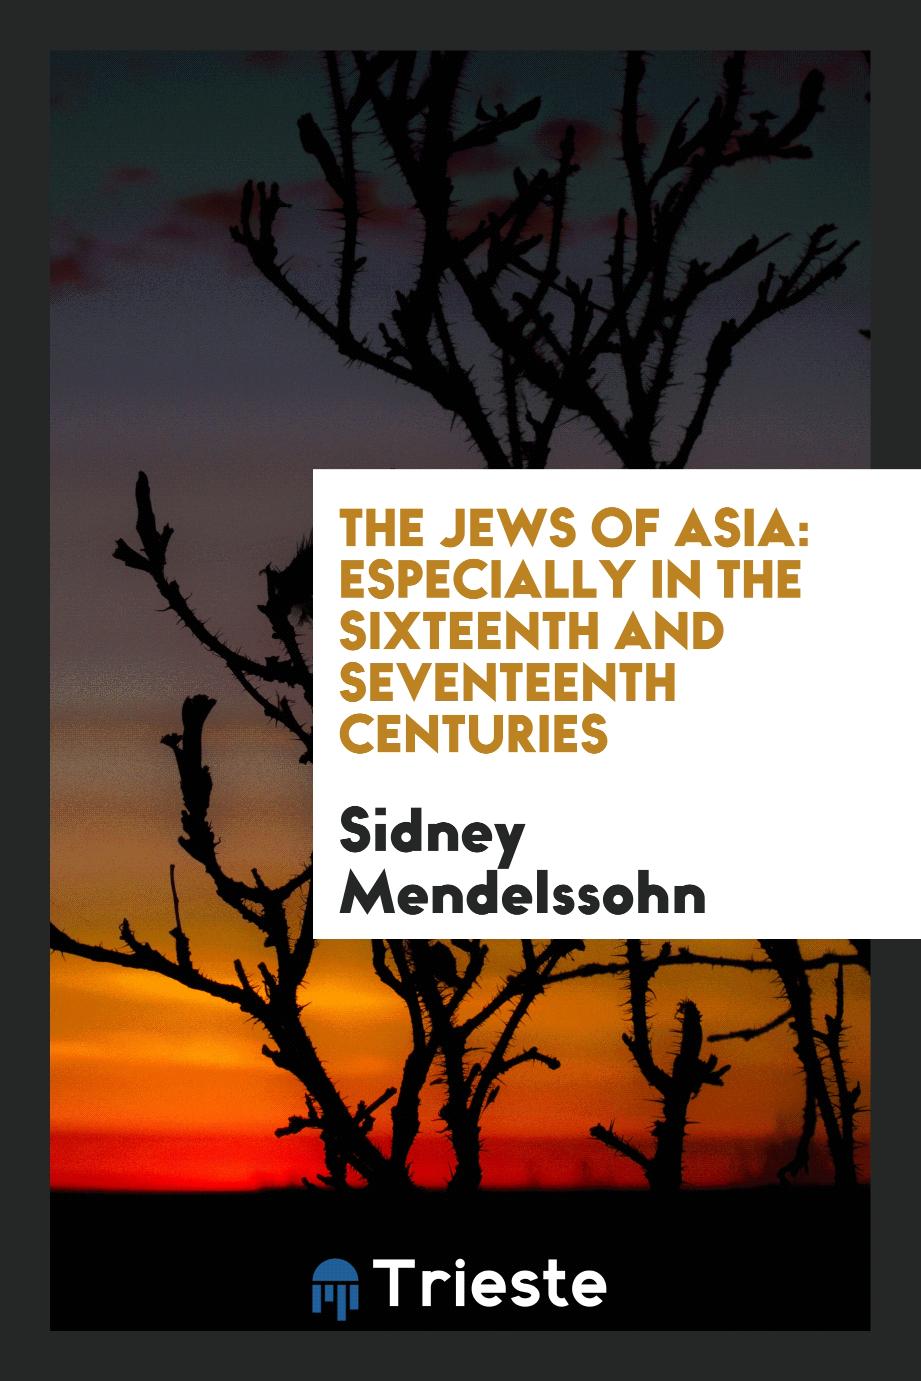 The Jews of Asia: especially in the sixteenth and seventeenth centuries